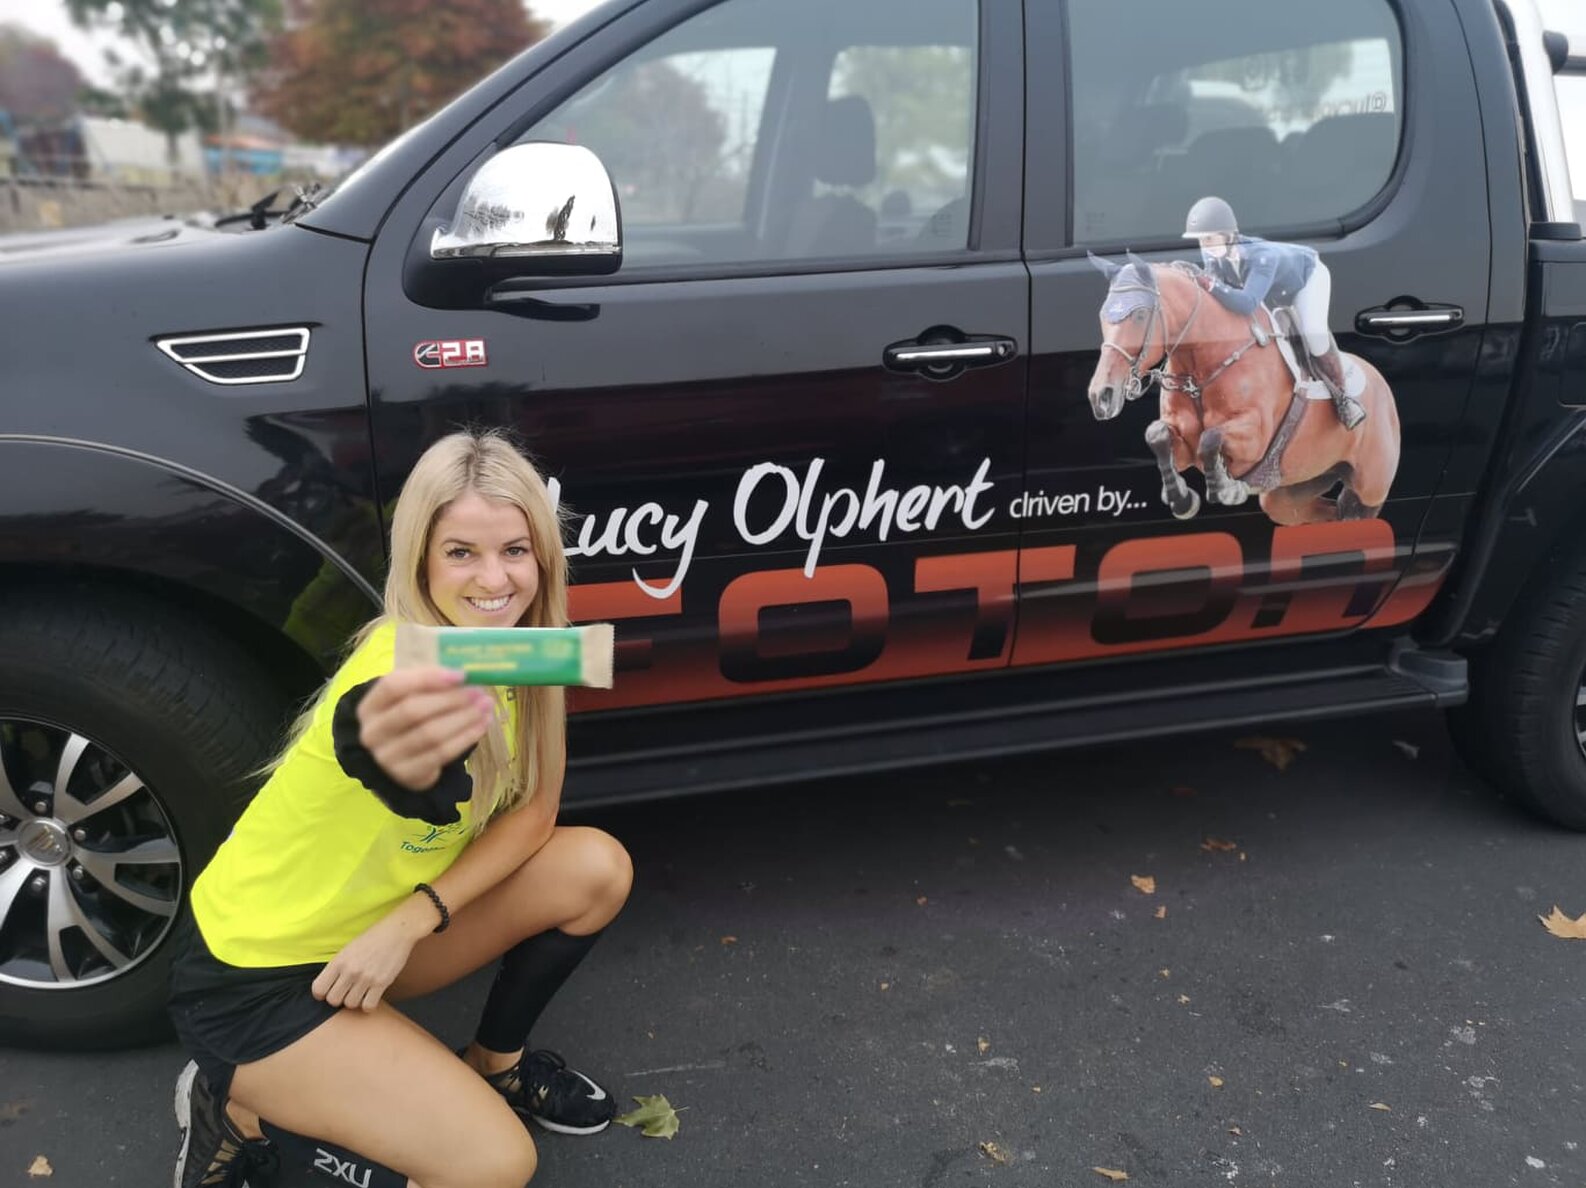 An interview with #teamnothingnaughty athlete ambassador Lucy Olphert